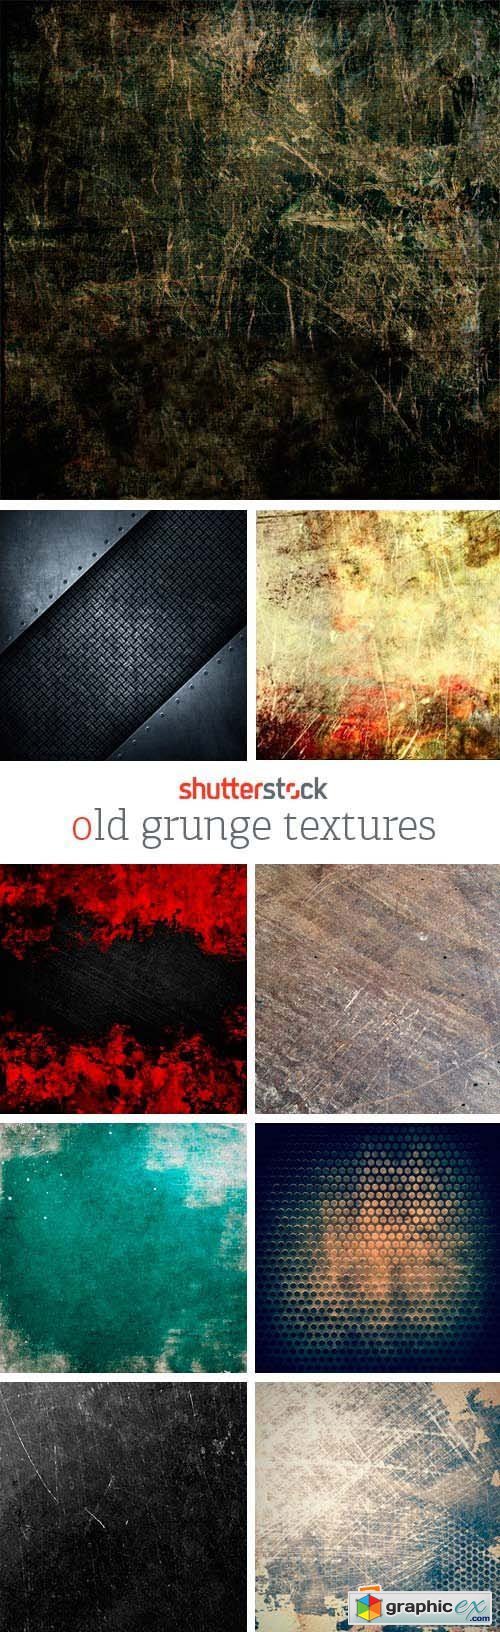 Amazing SS - Old Grunge Textures, 25xJPGs